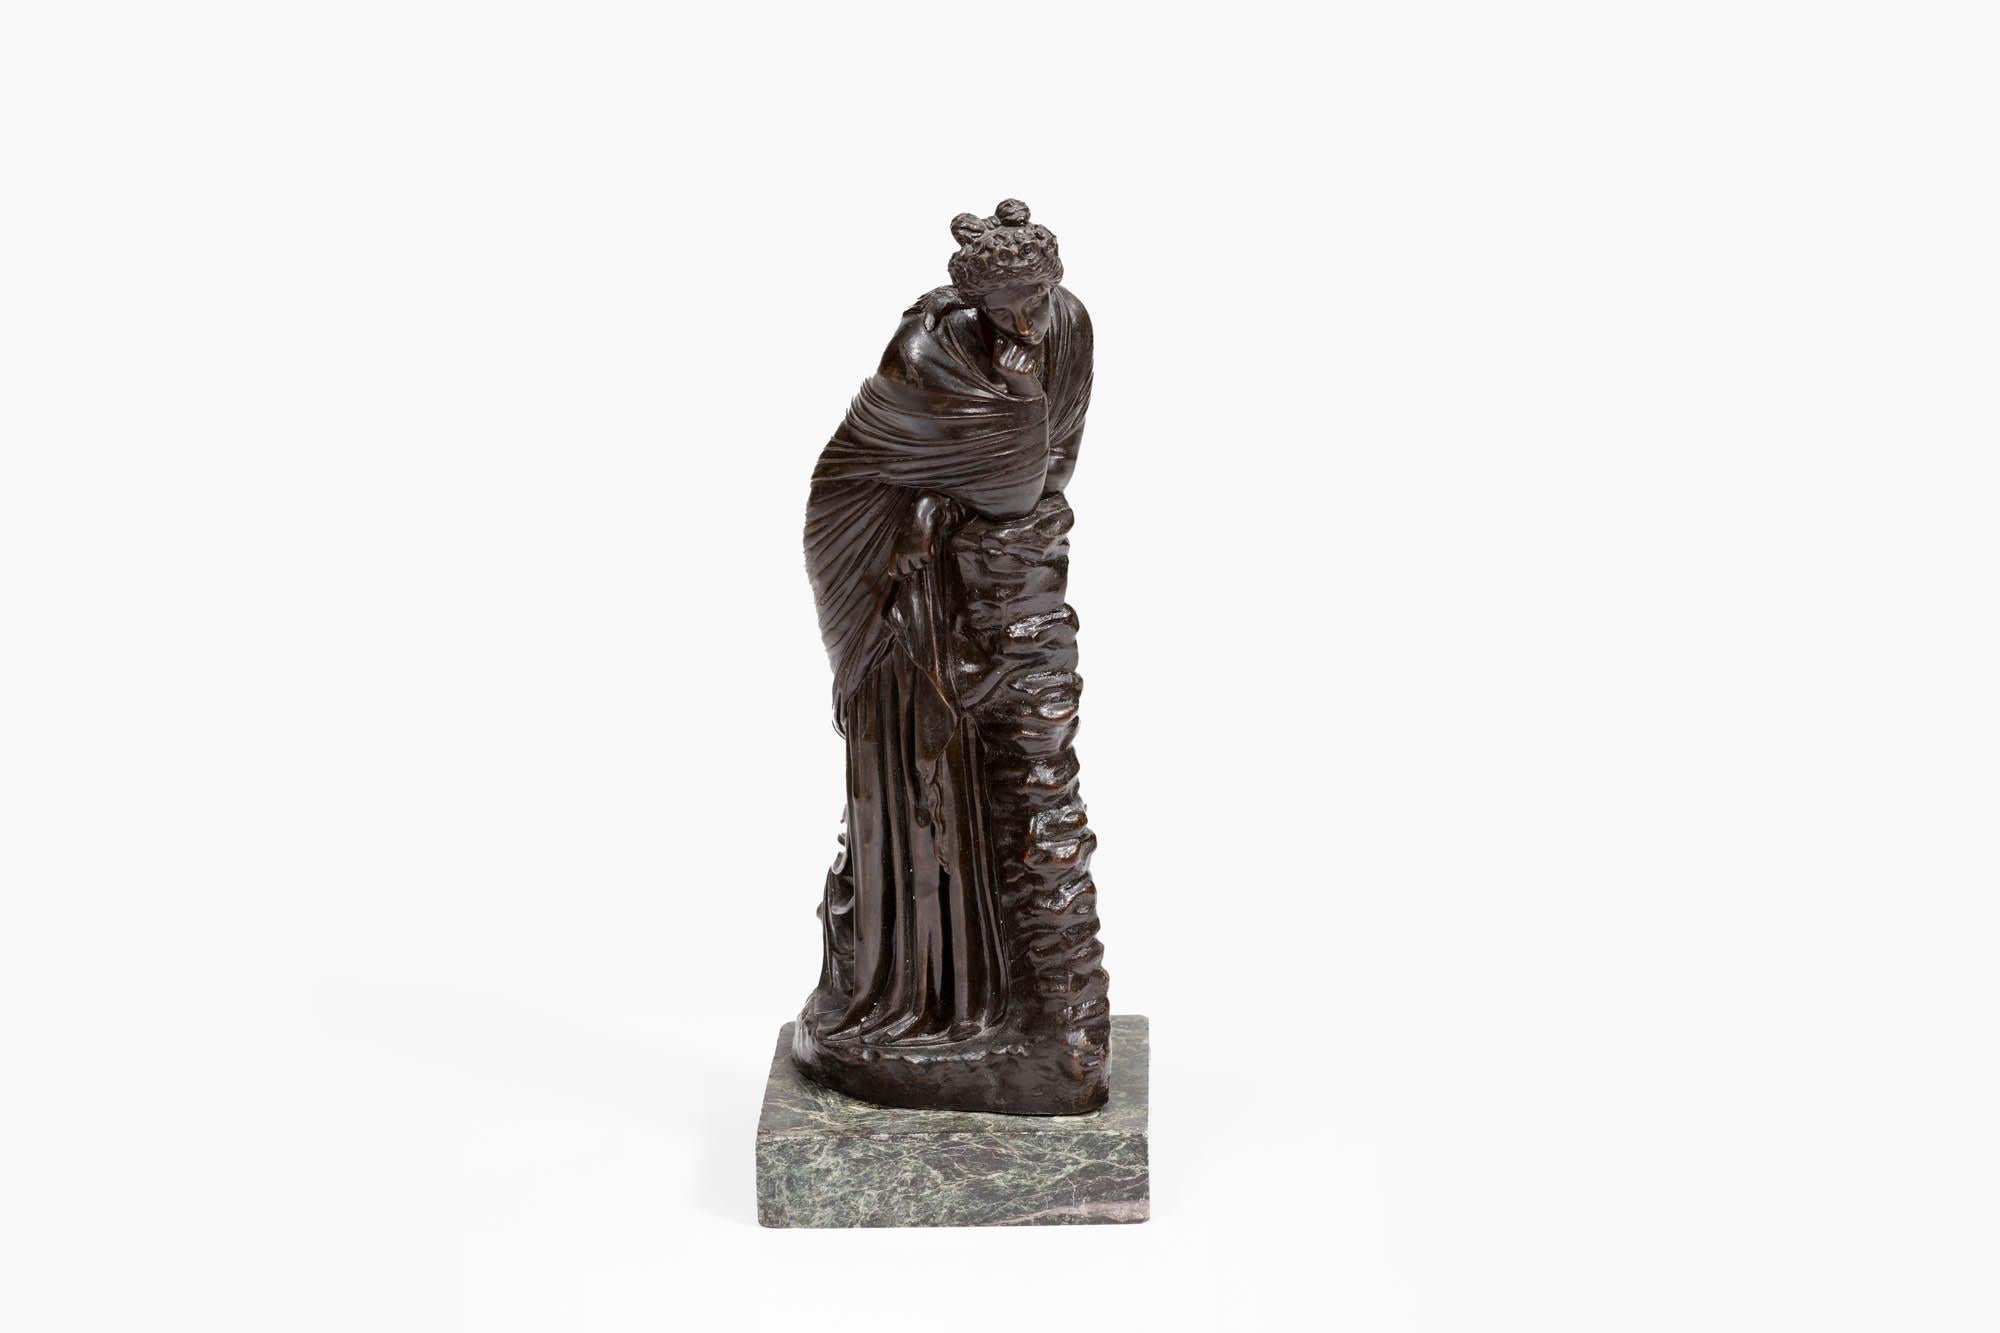 19th Century Grand Tour bronze figurine of Polyhymnia daughter of Zeus, after the antique, standing at full-length, resting against a pile of stacked stones. She wears a long dress, and her hair tied up in a wreath of flowers. The statue sits on a